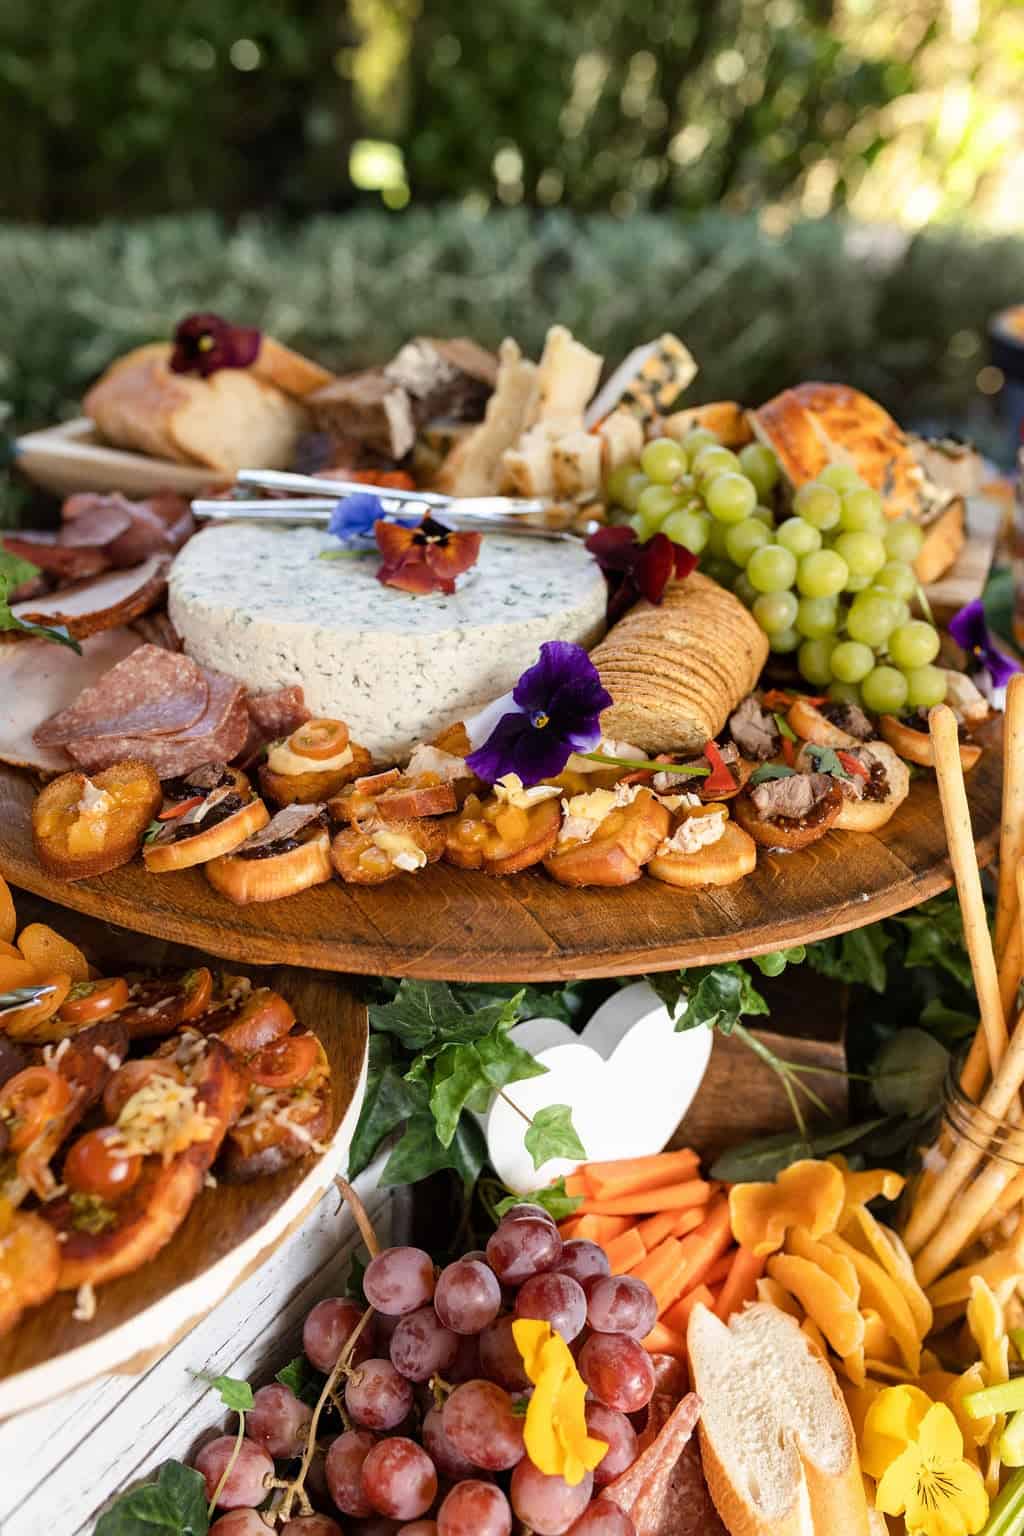 A platter of cheese, fruit, and meats on a wooden board.